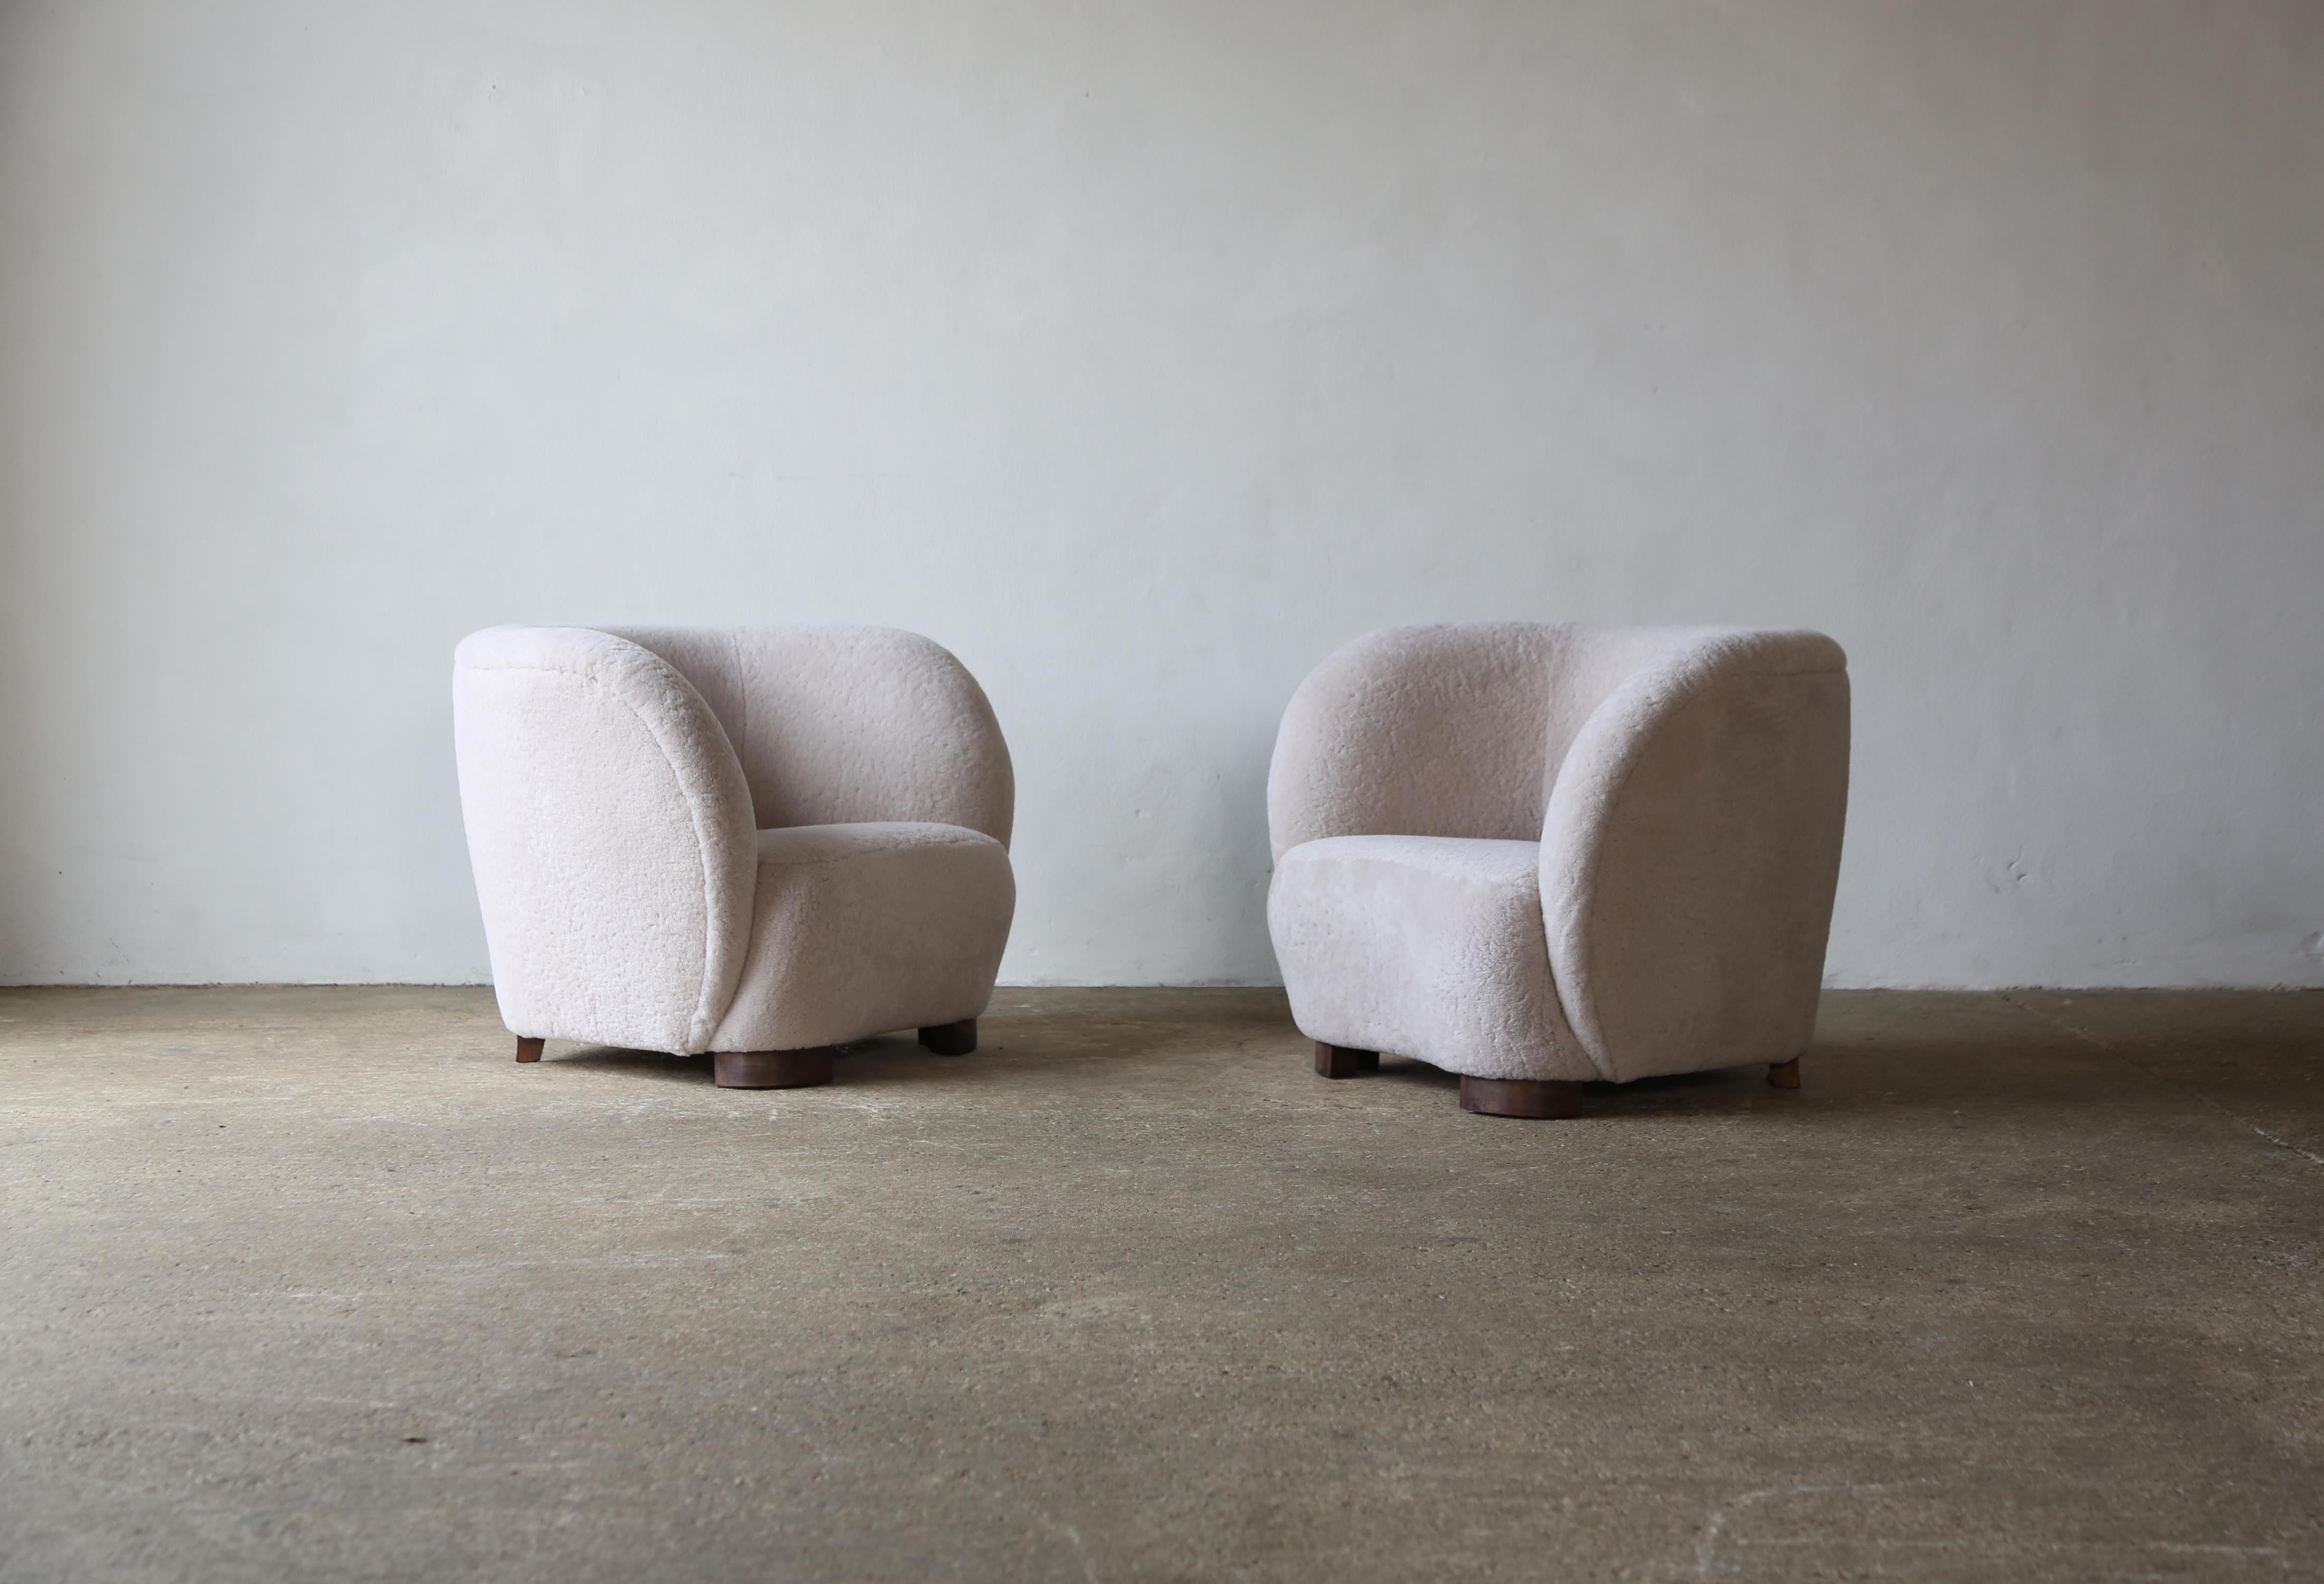 A beautiful pair of modern armchairs, in the style of Flemming Lassen / Viggo Boesen, upholstered in natural sheepskin.  Handmade beech frames and sprung seats.  Available in COM.  Fast shipping worldwide.



